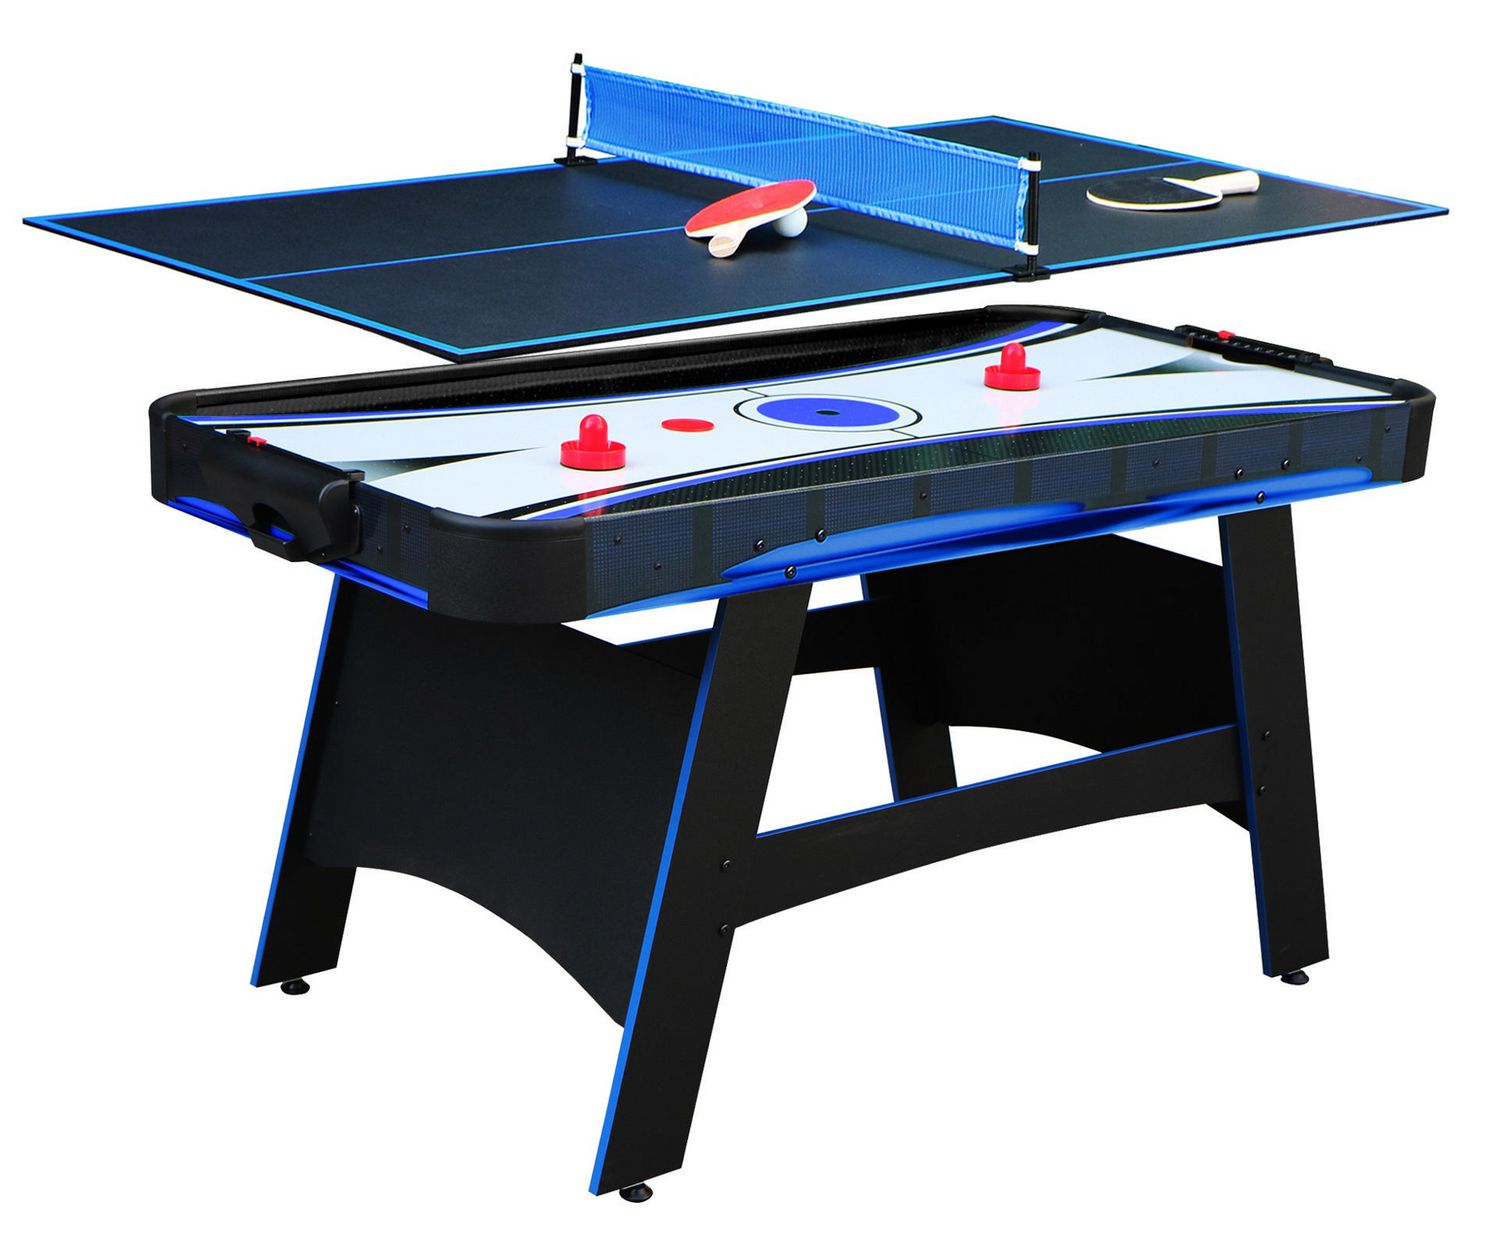 Bandit 5-ft Air Hockey Table with Table Tennis Top - Best for the Fun-loving Dad